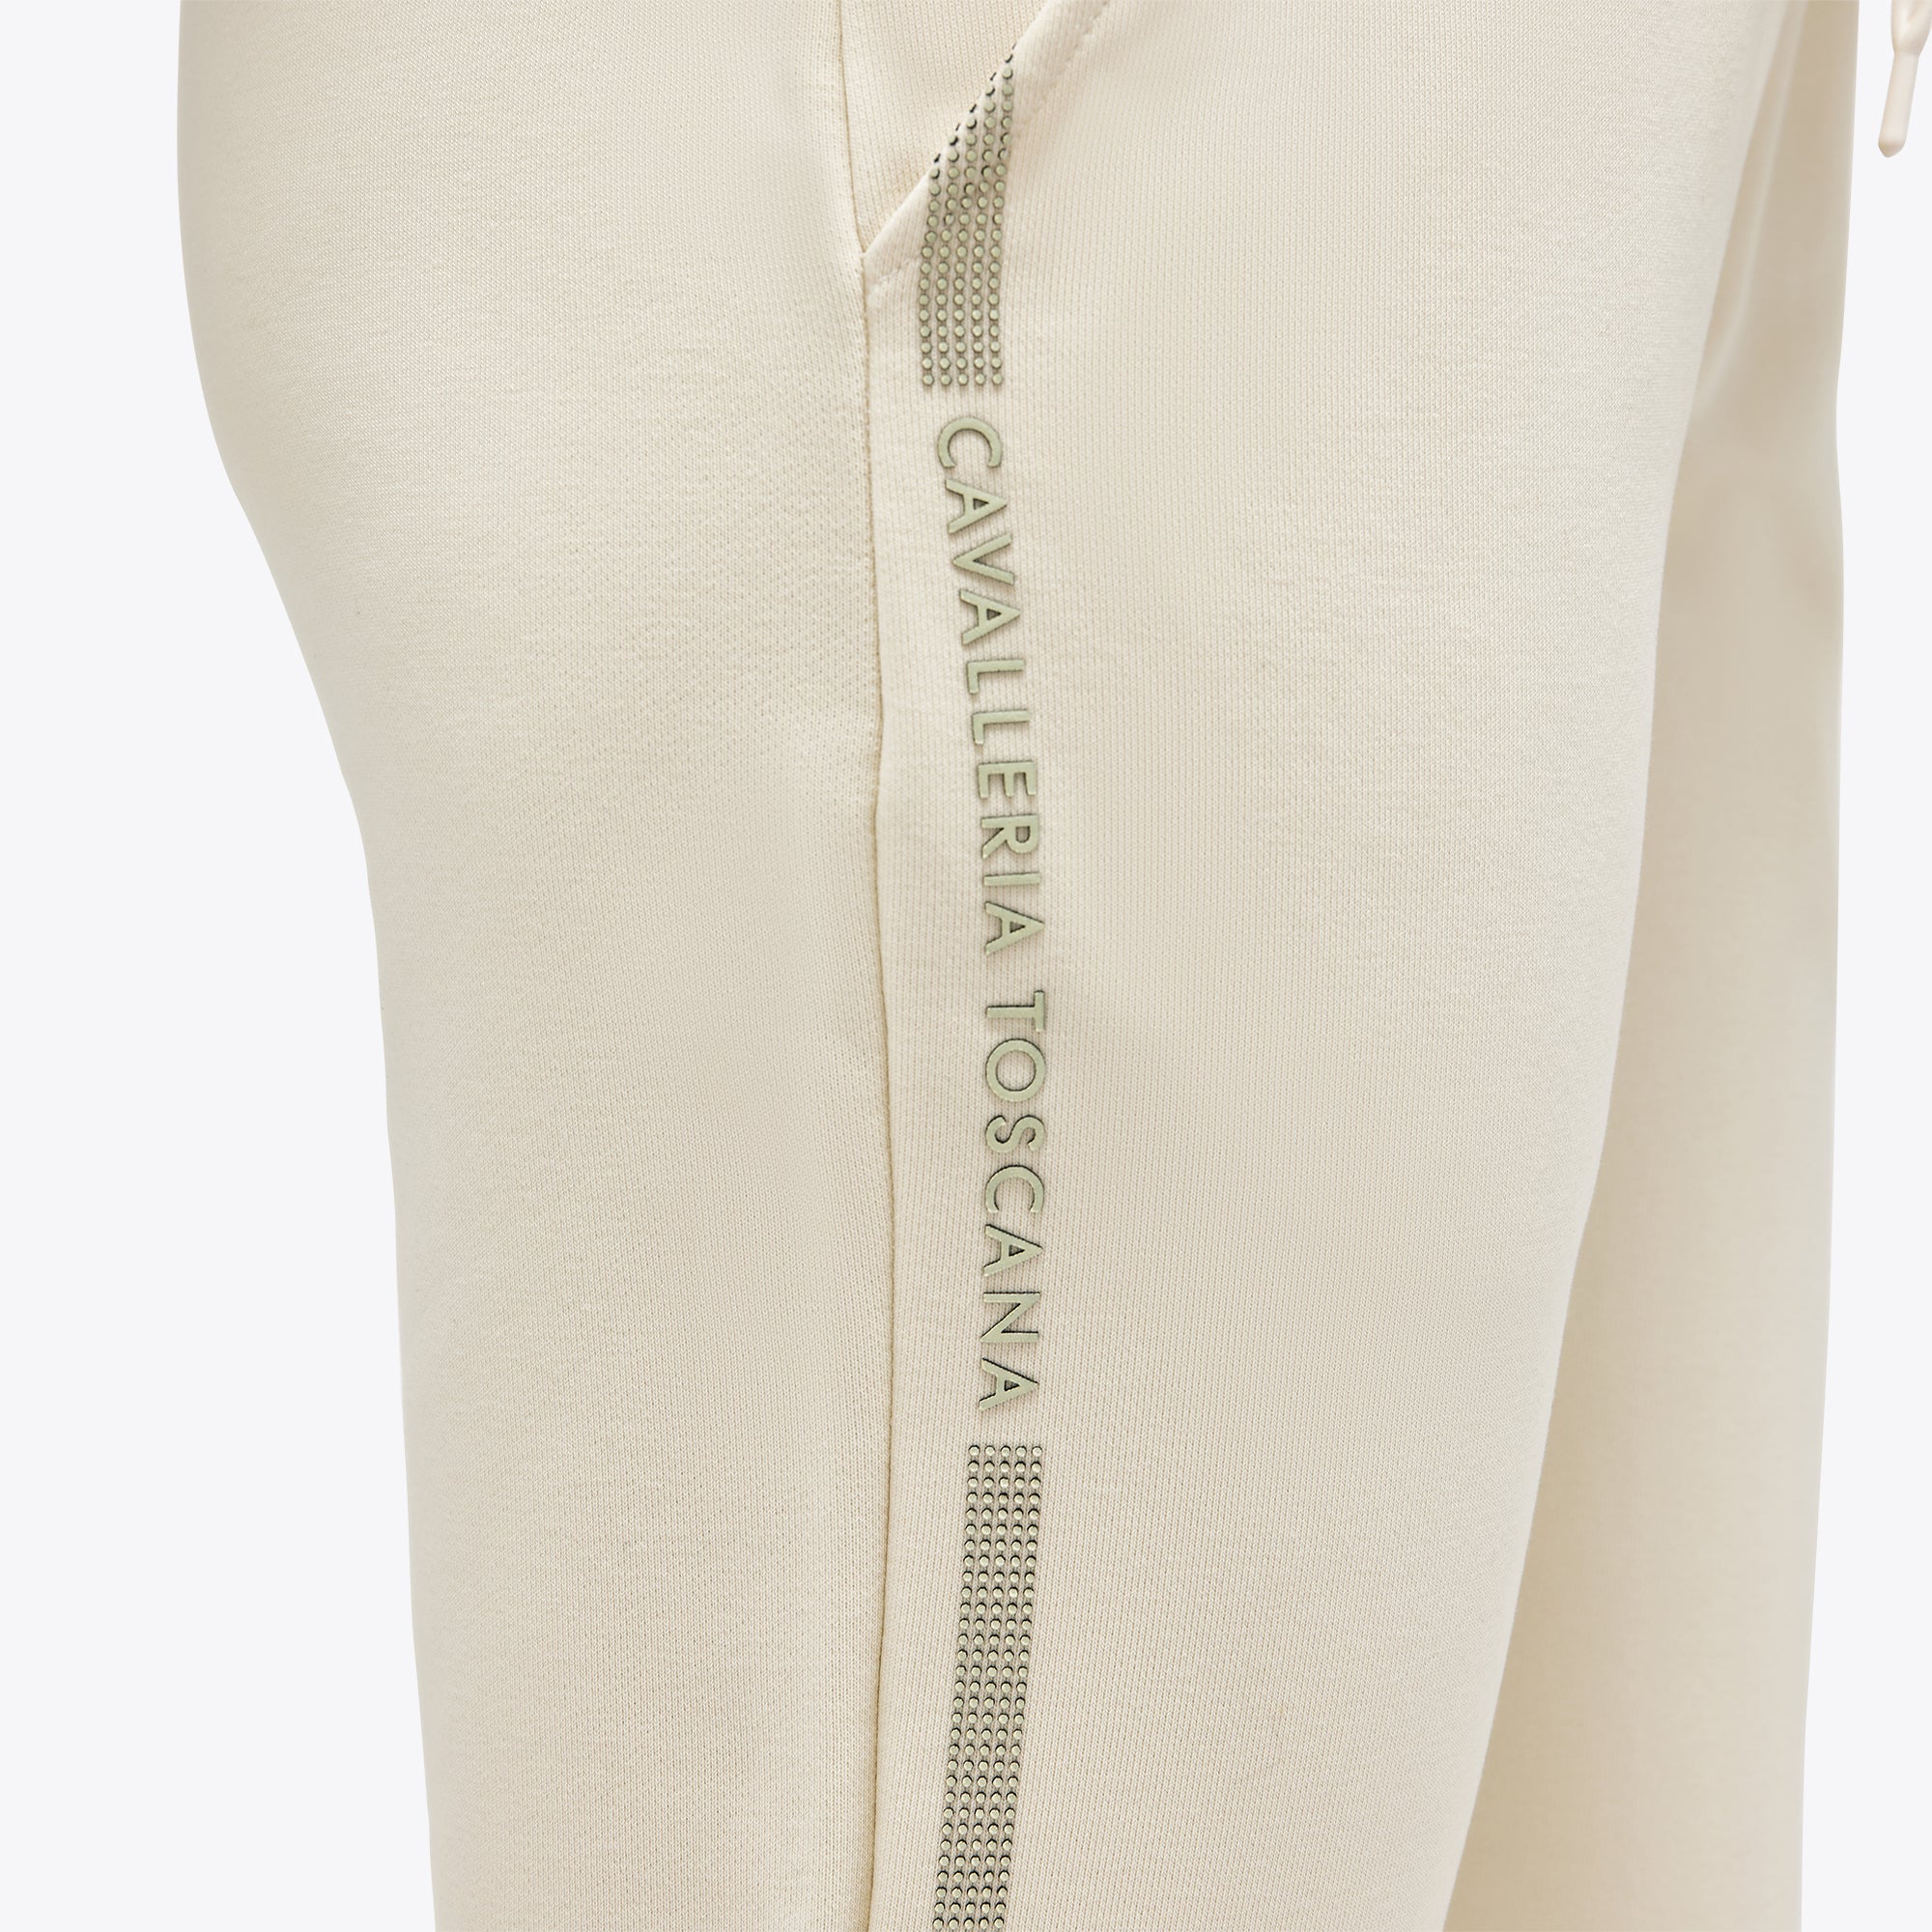 Cavalleria Toscana sweatpants are made of soft cotton and feature an on-trend allover print. They are elastic at the waist and leg openings for optimum comfort. The pants have two front pockets and one back pocket. They are available in the color Offwhite.